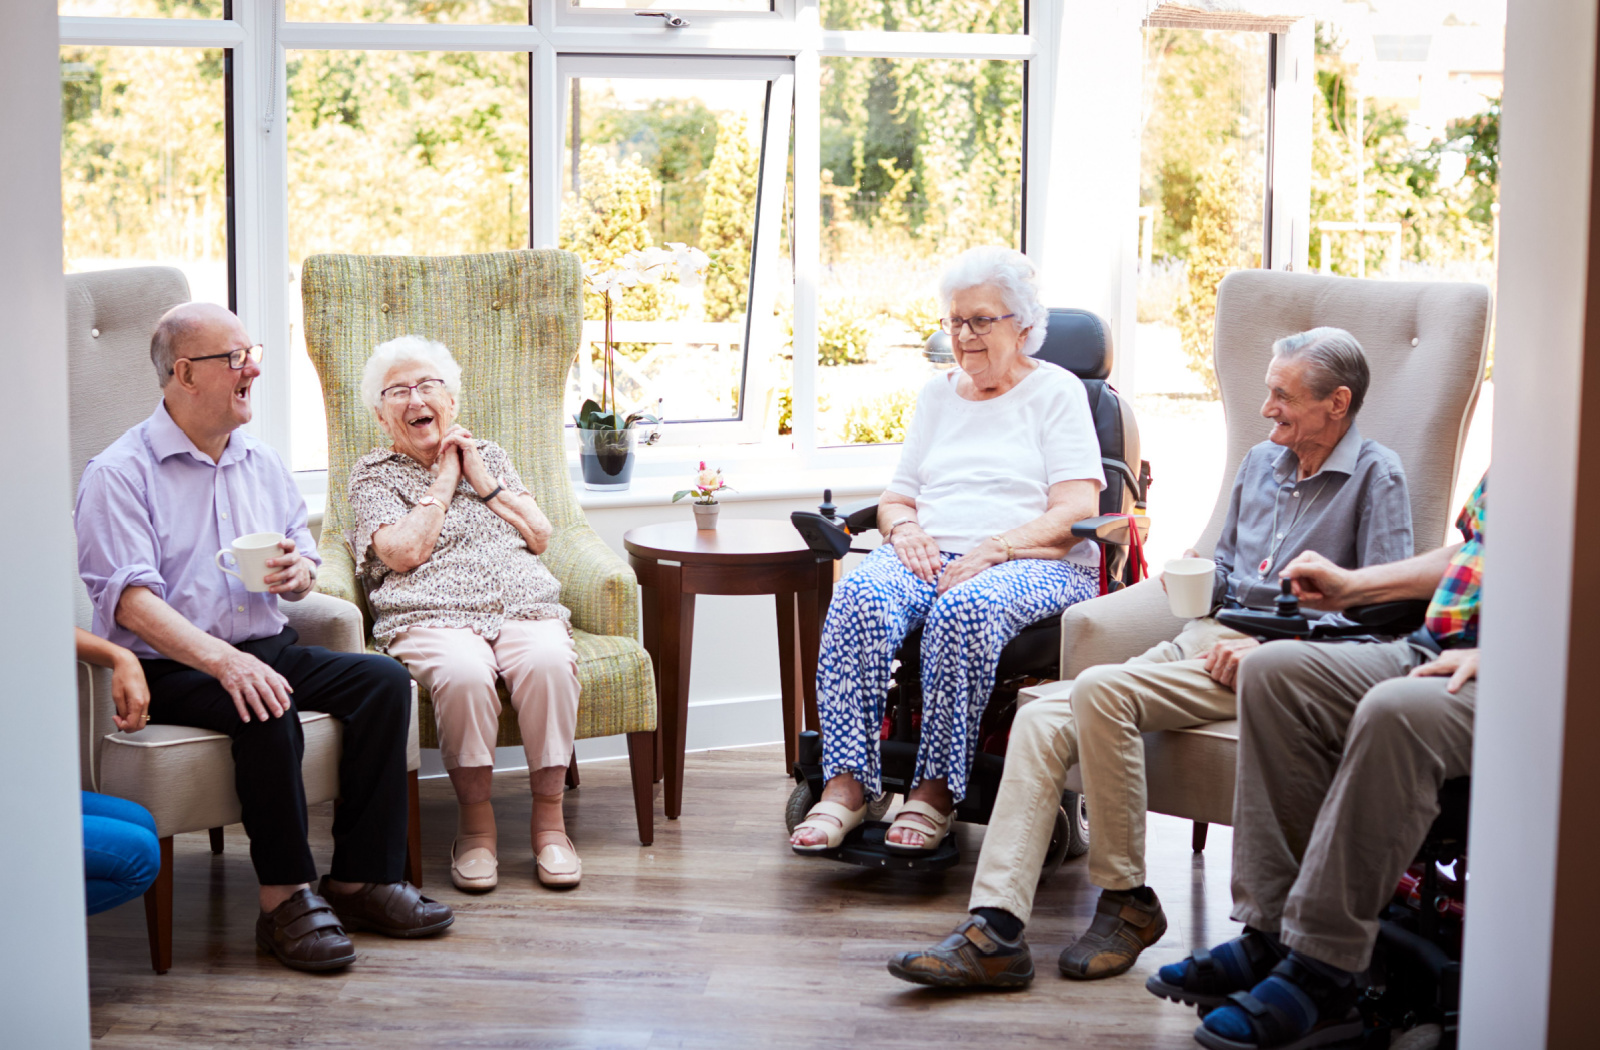 A group of older adults sitting in a semicircle in a common area, drinking tea or coffee and laughing